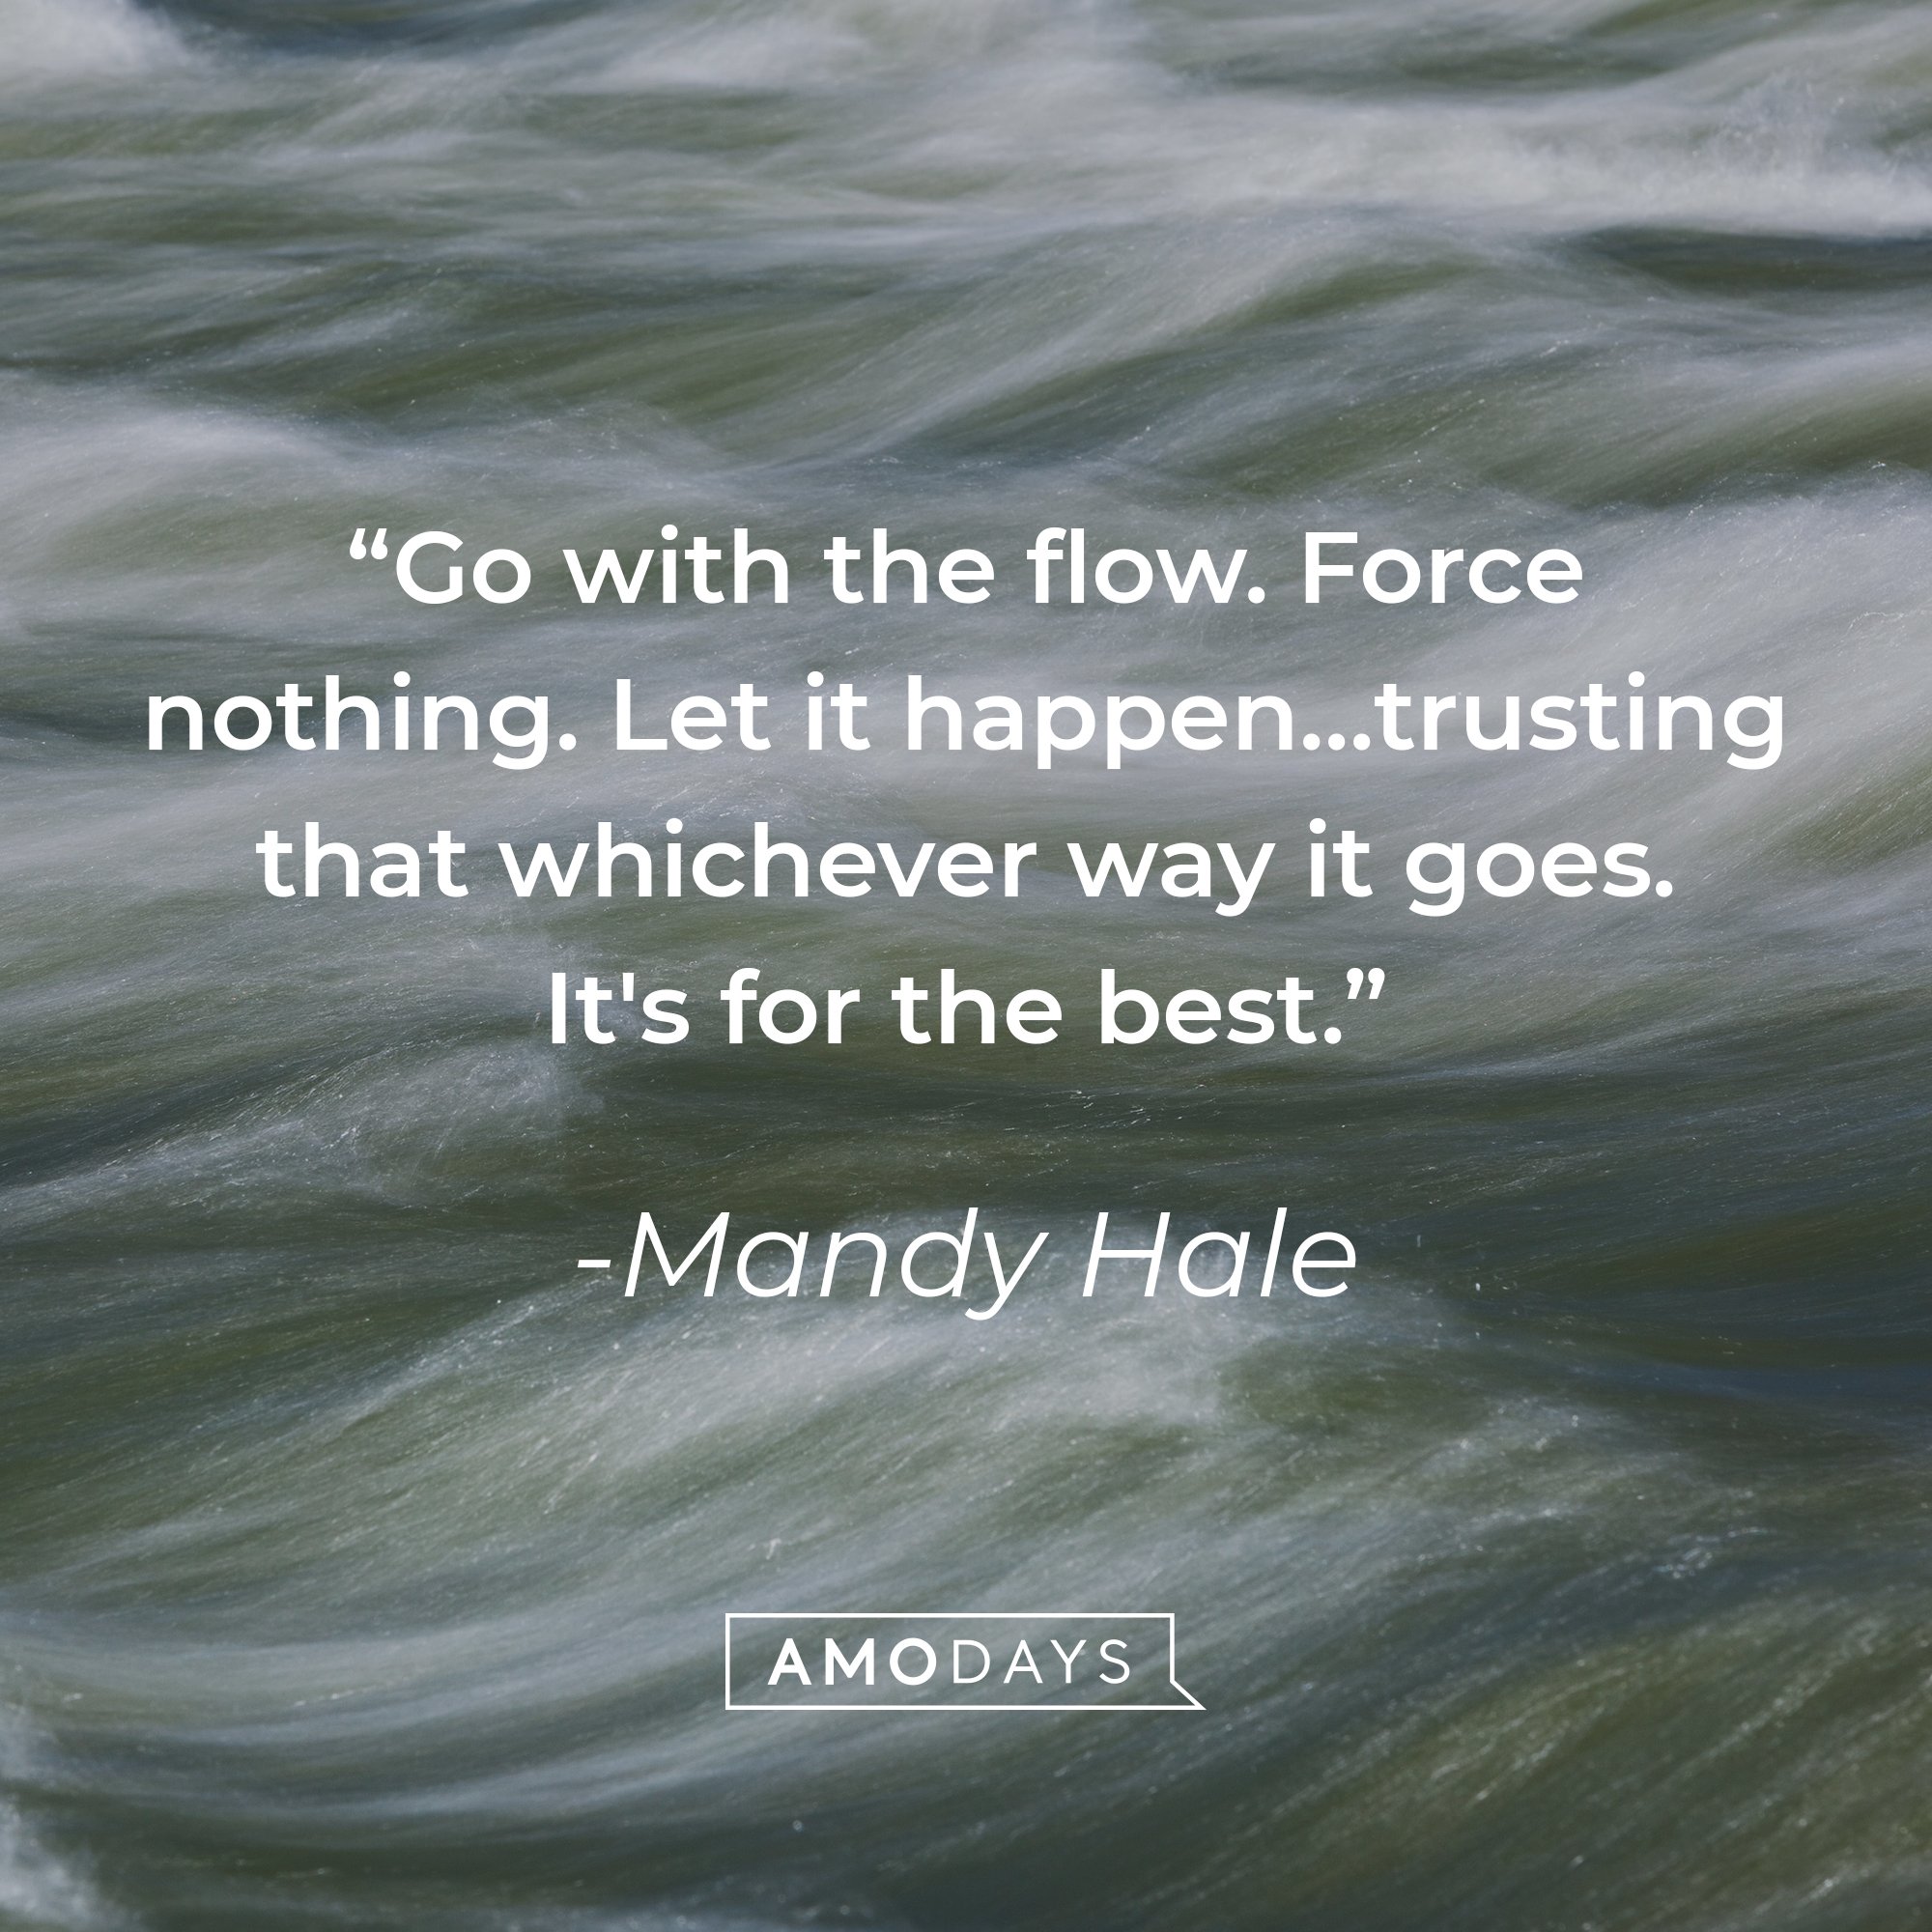 Mandy Hale's quote: "Go with the flow. Force nothing. Let it happen…trusting that whichever way it goes. It's for the best." | Image: AmoDays